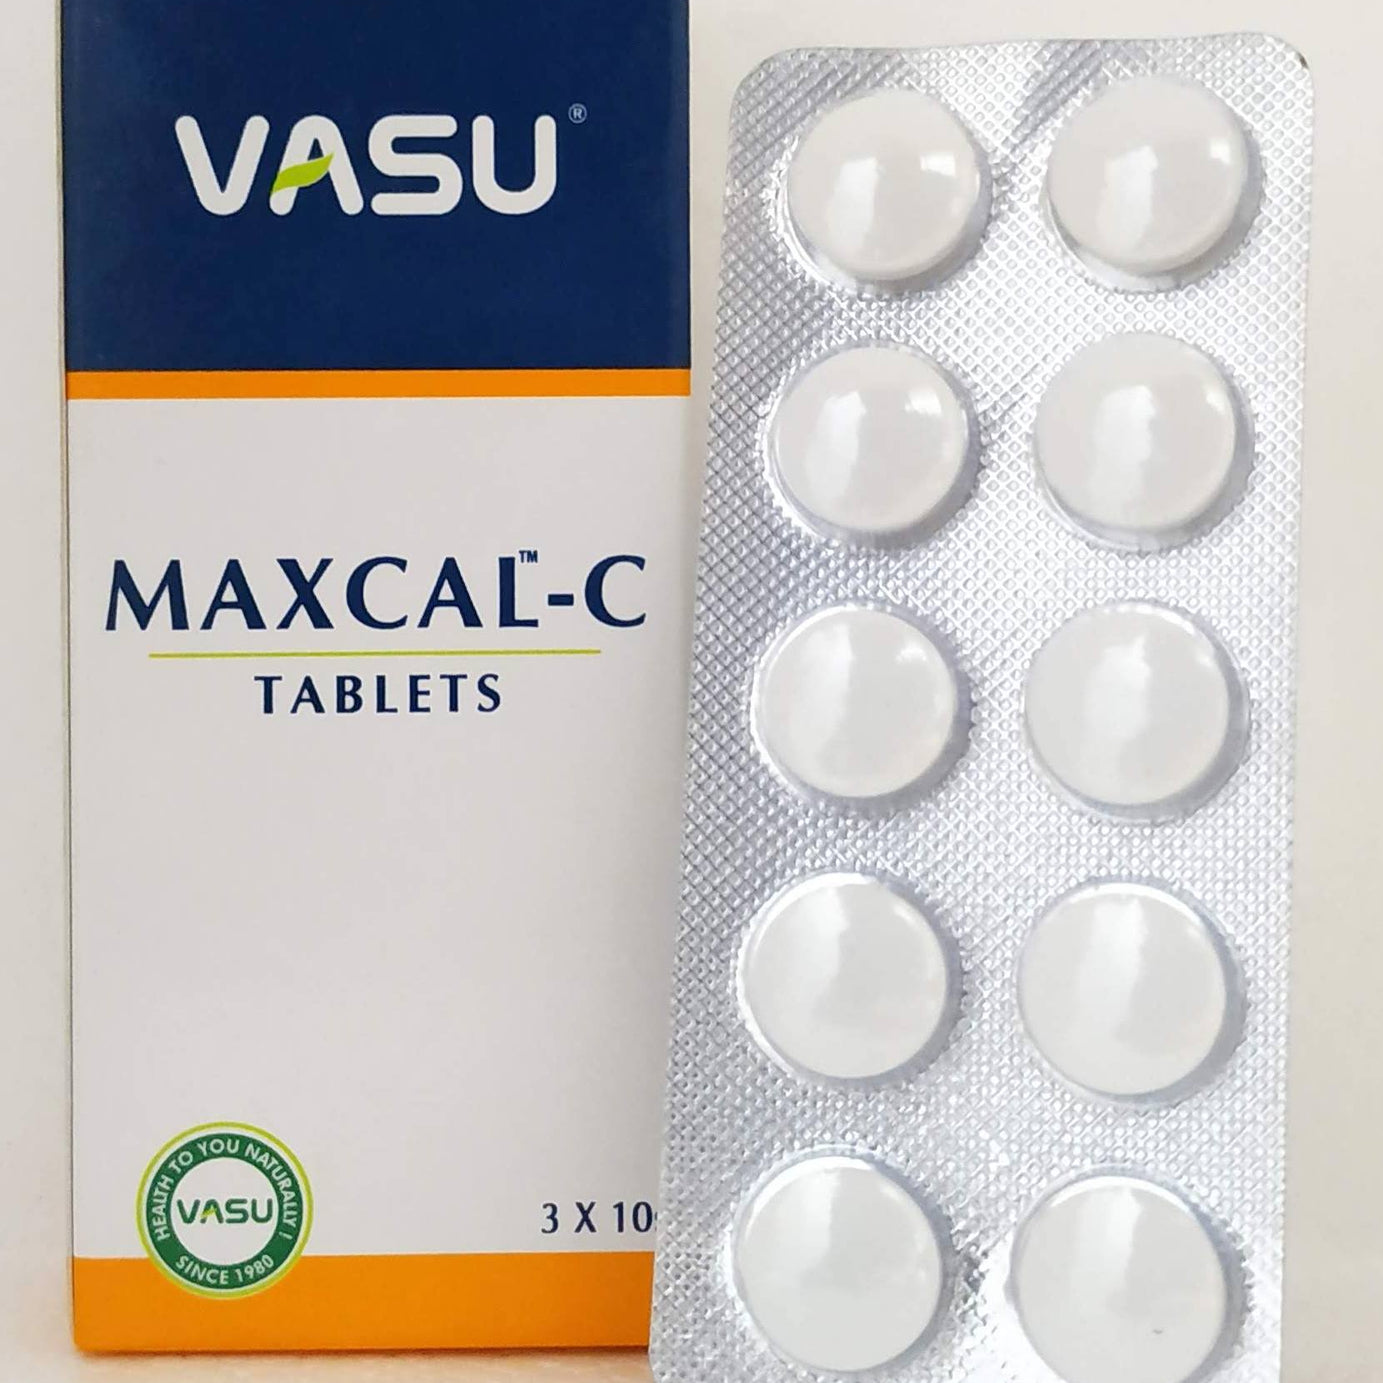 Shop Maxcal-C Tablets - 10Tablets at price 40.00 from Vasu herbals Online - Ayush Care